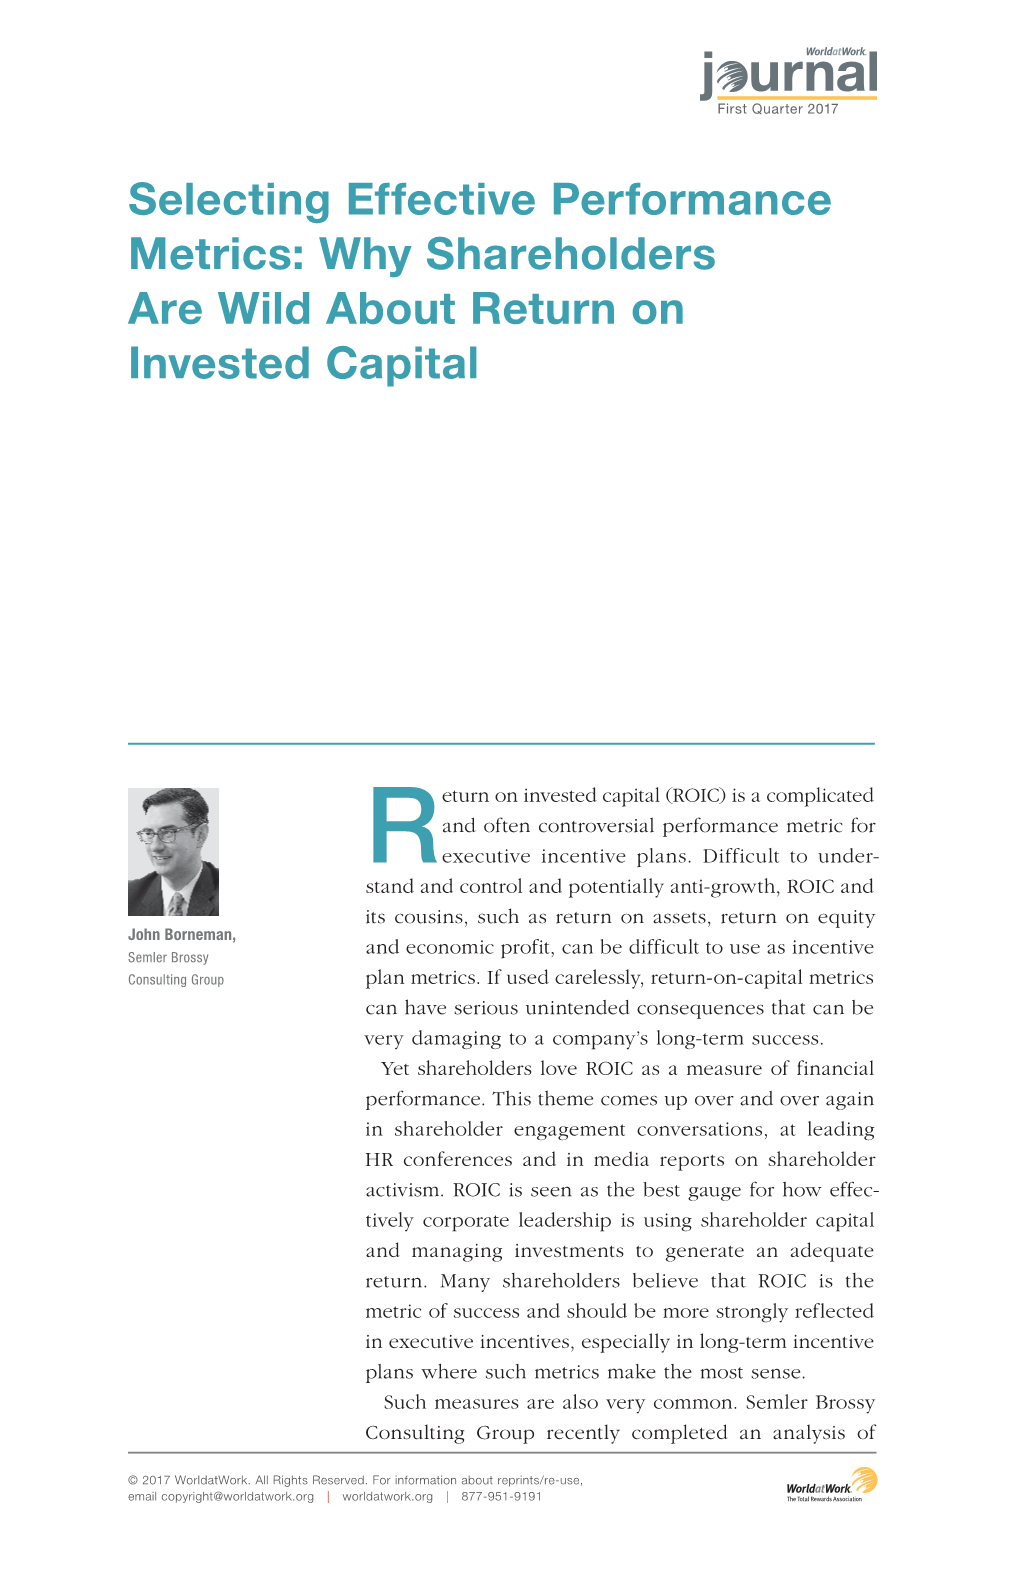 Why Shareholders Are Wild About Return on Invested Capital